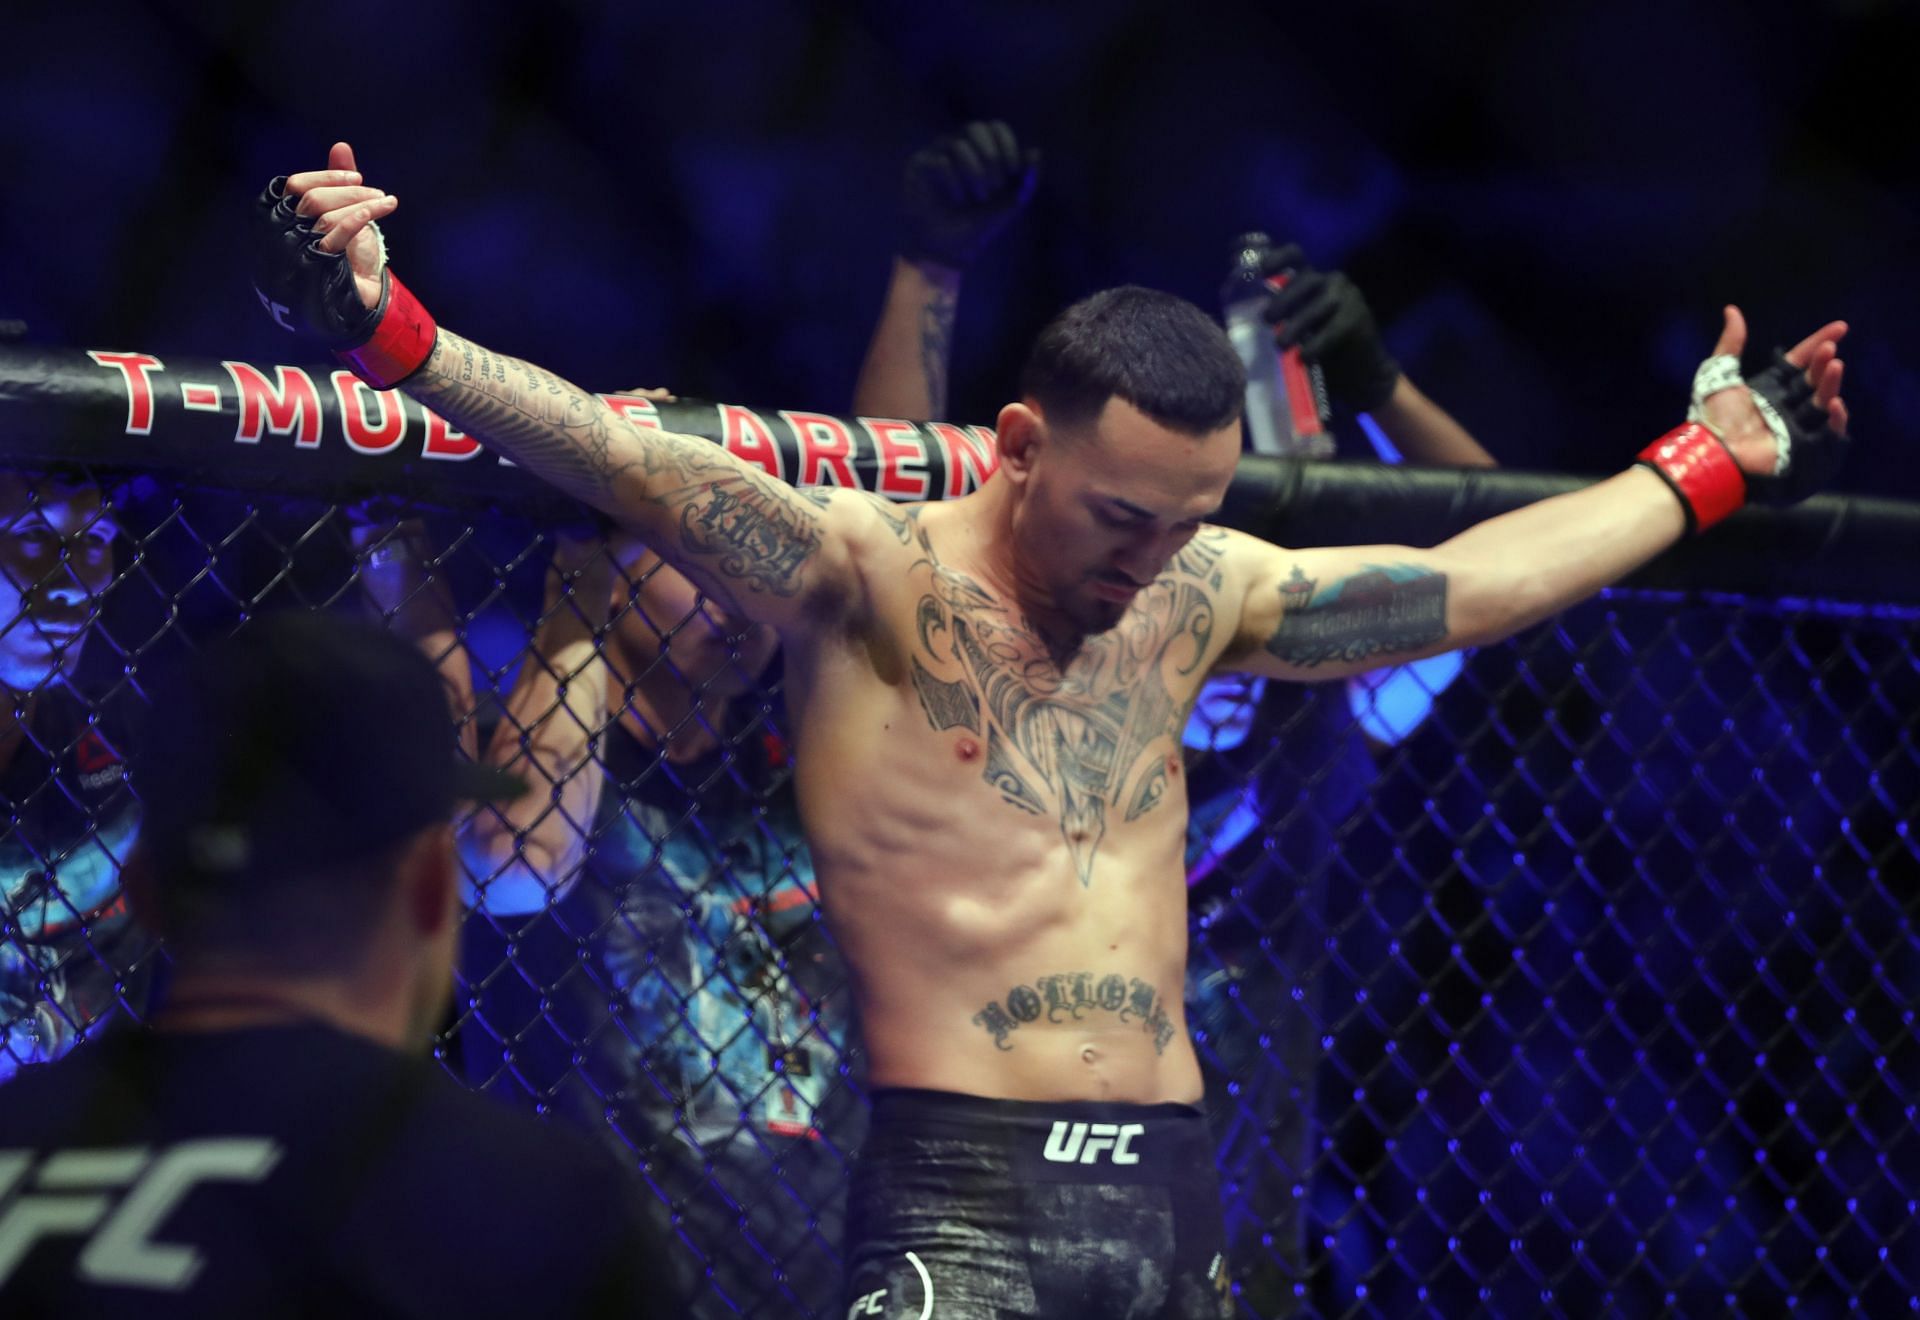 Holloway lost his featherweight title in 2019